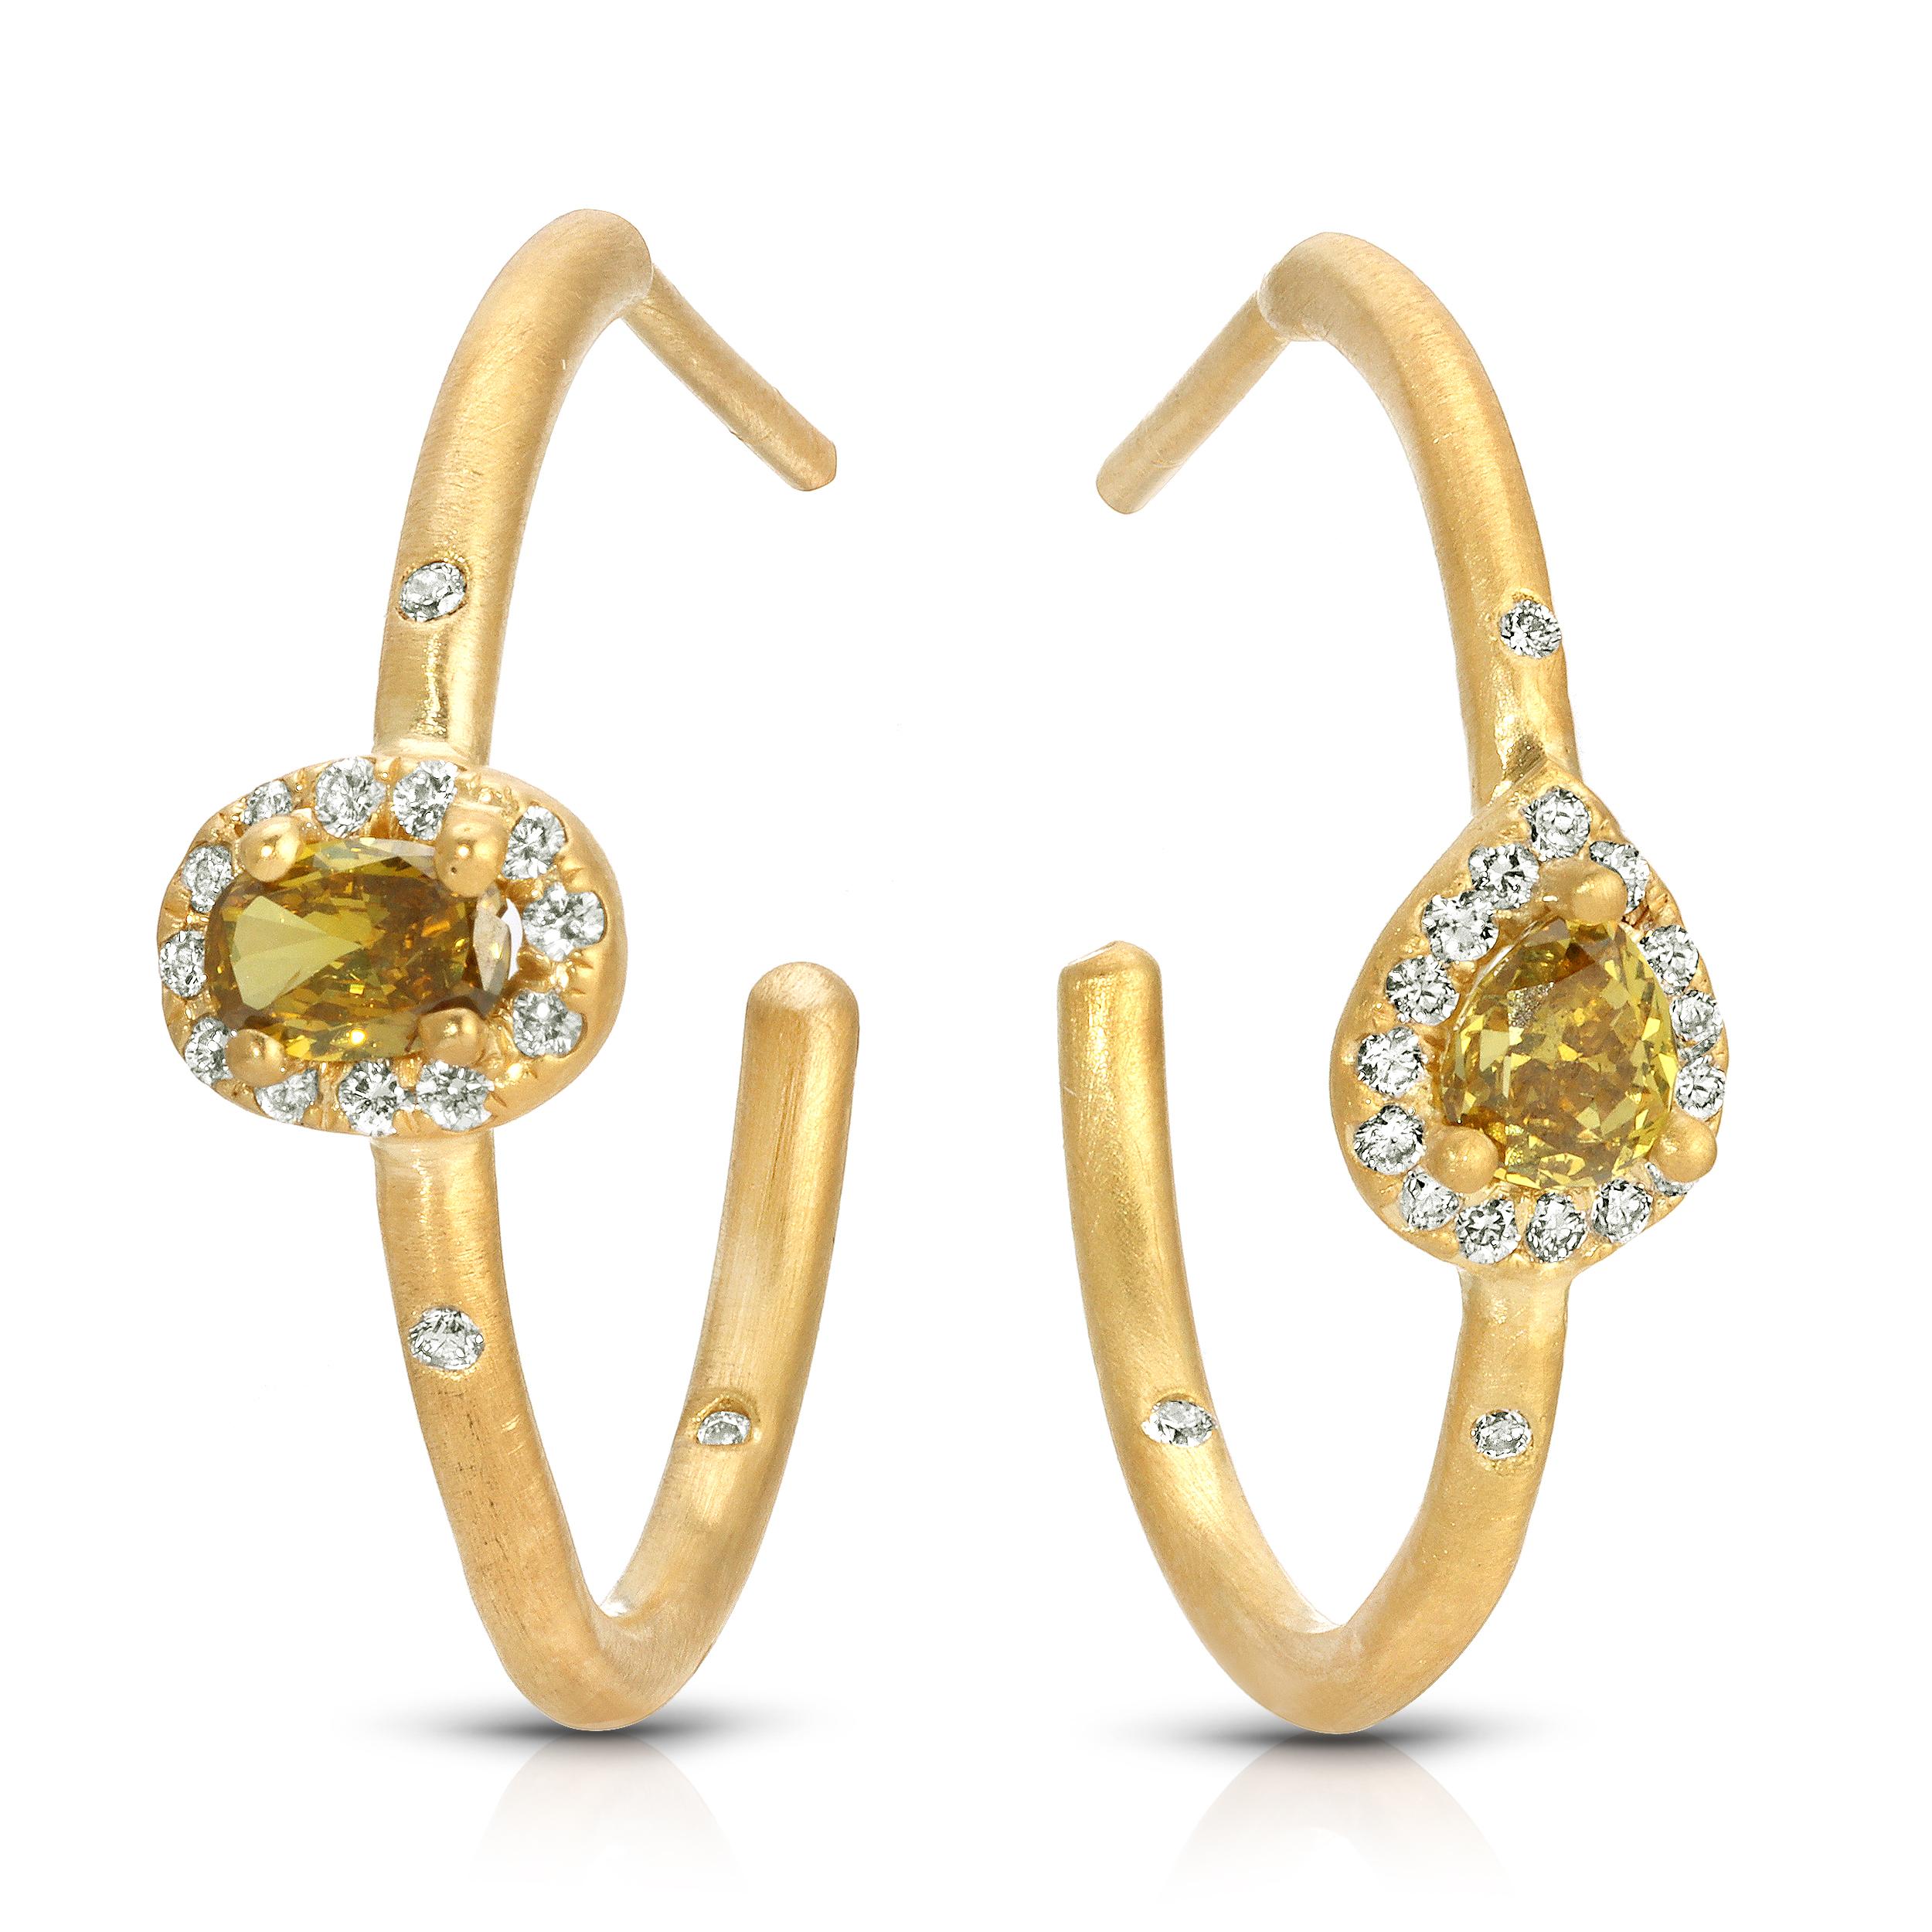  .26ct fancy colored mix shape diamond hoops with .20ct vs quality Diamond pave in 18k matte yellow gold. Handmade in my studio in Los Angeles by my team of Master Craftsmen.

